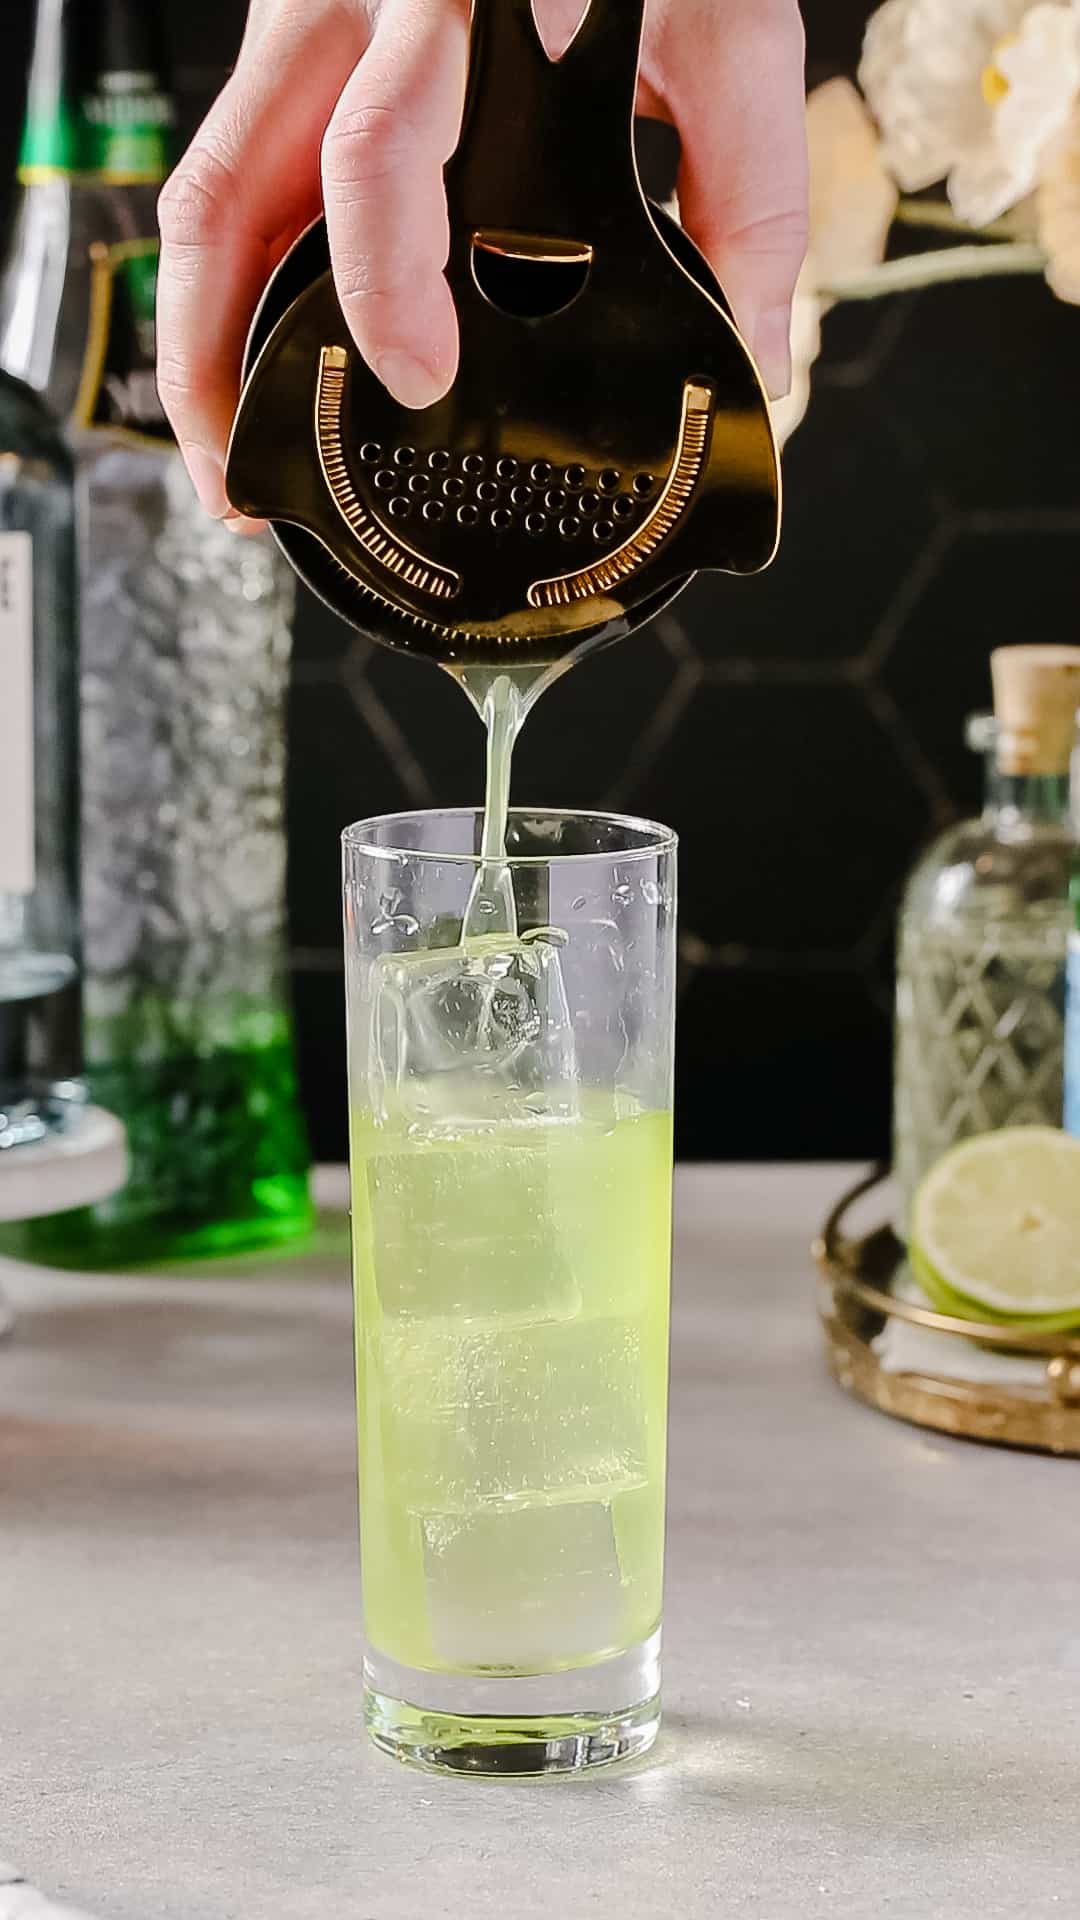 Hand using a gold colored cocktail shaker and strainer to strain a green colored drink into a Collins glass filled with ice.